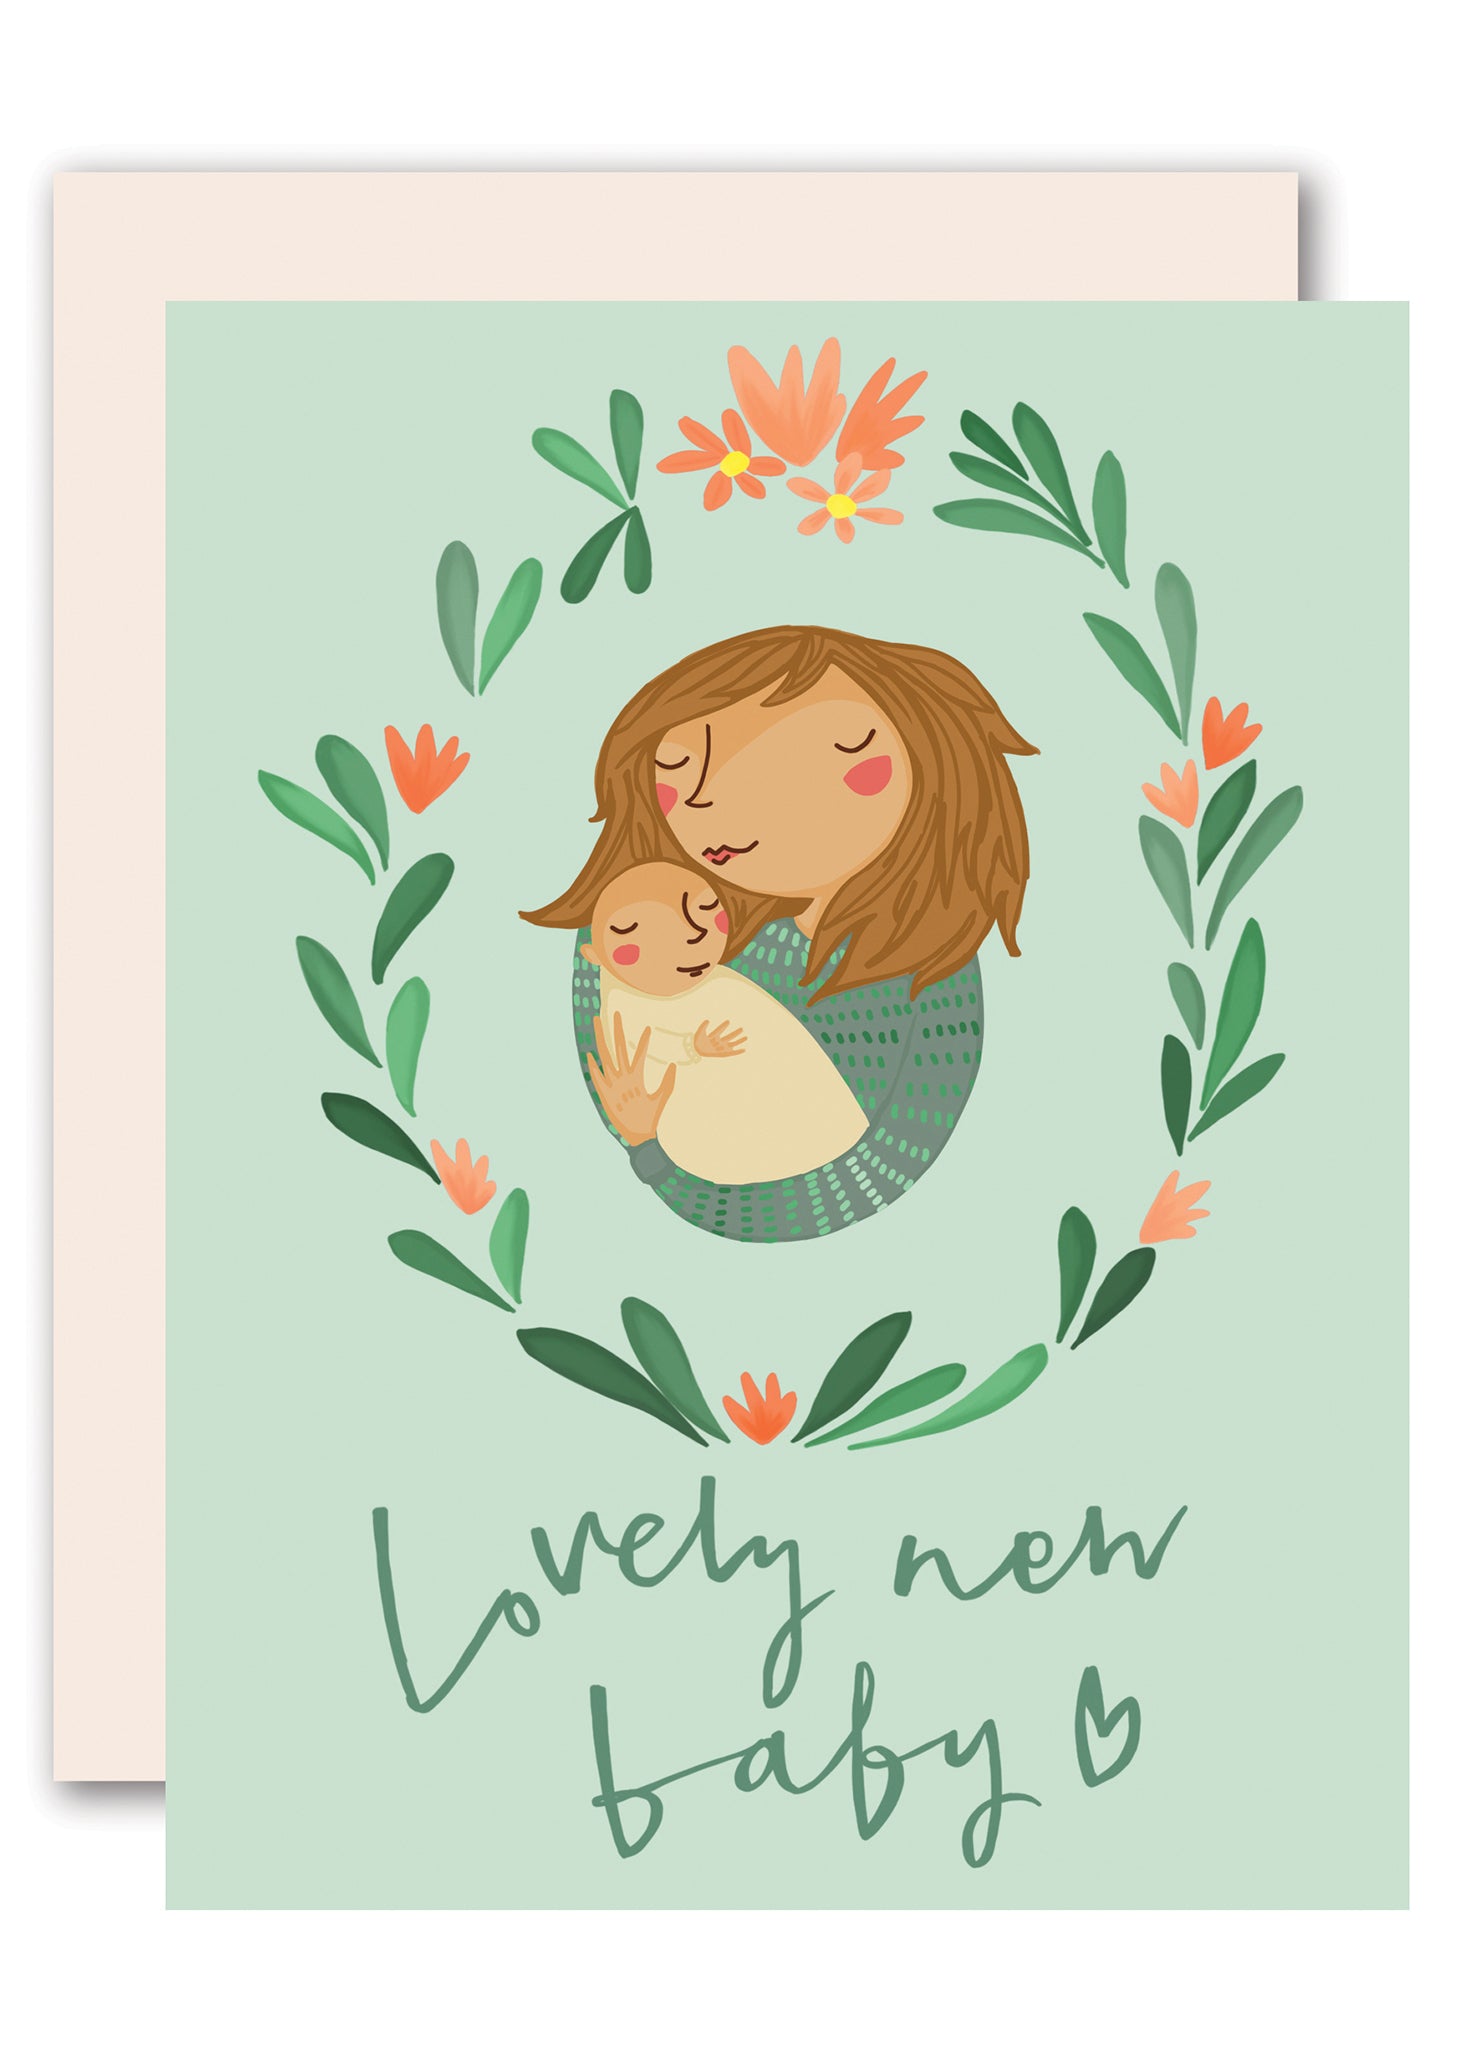 congratulations-baby-card-a-lovely-new-baby-by-pencil-joy